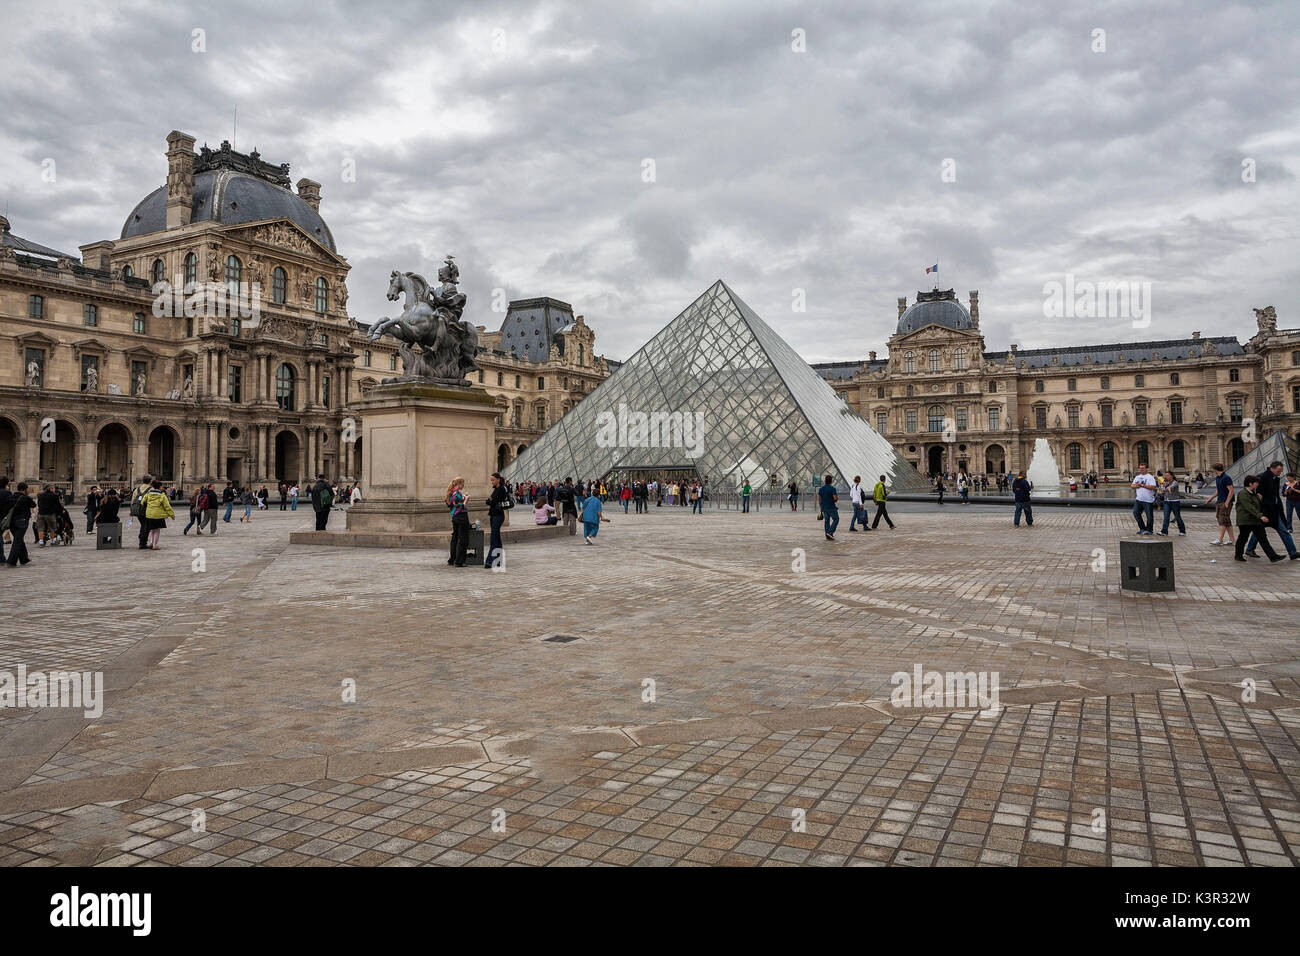 The Louvre Palace and Museum with its Pyramid Paris France Europe Stock Photo